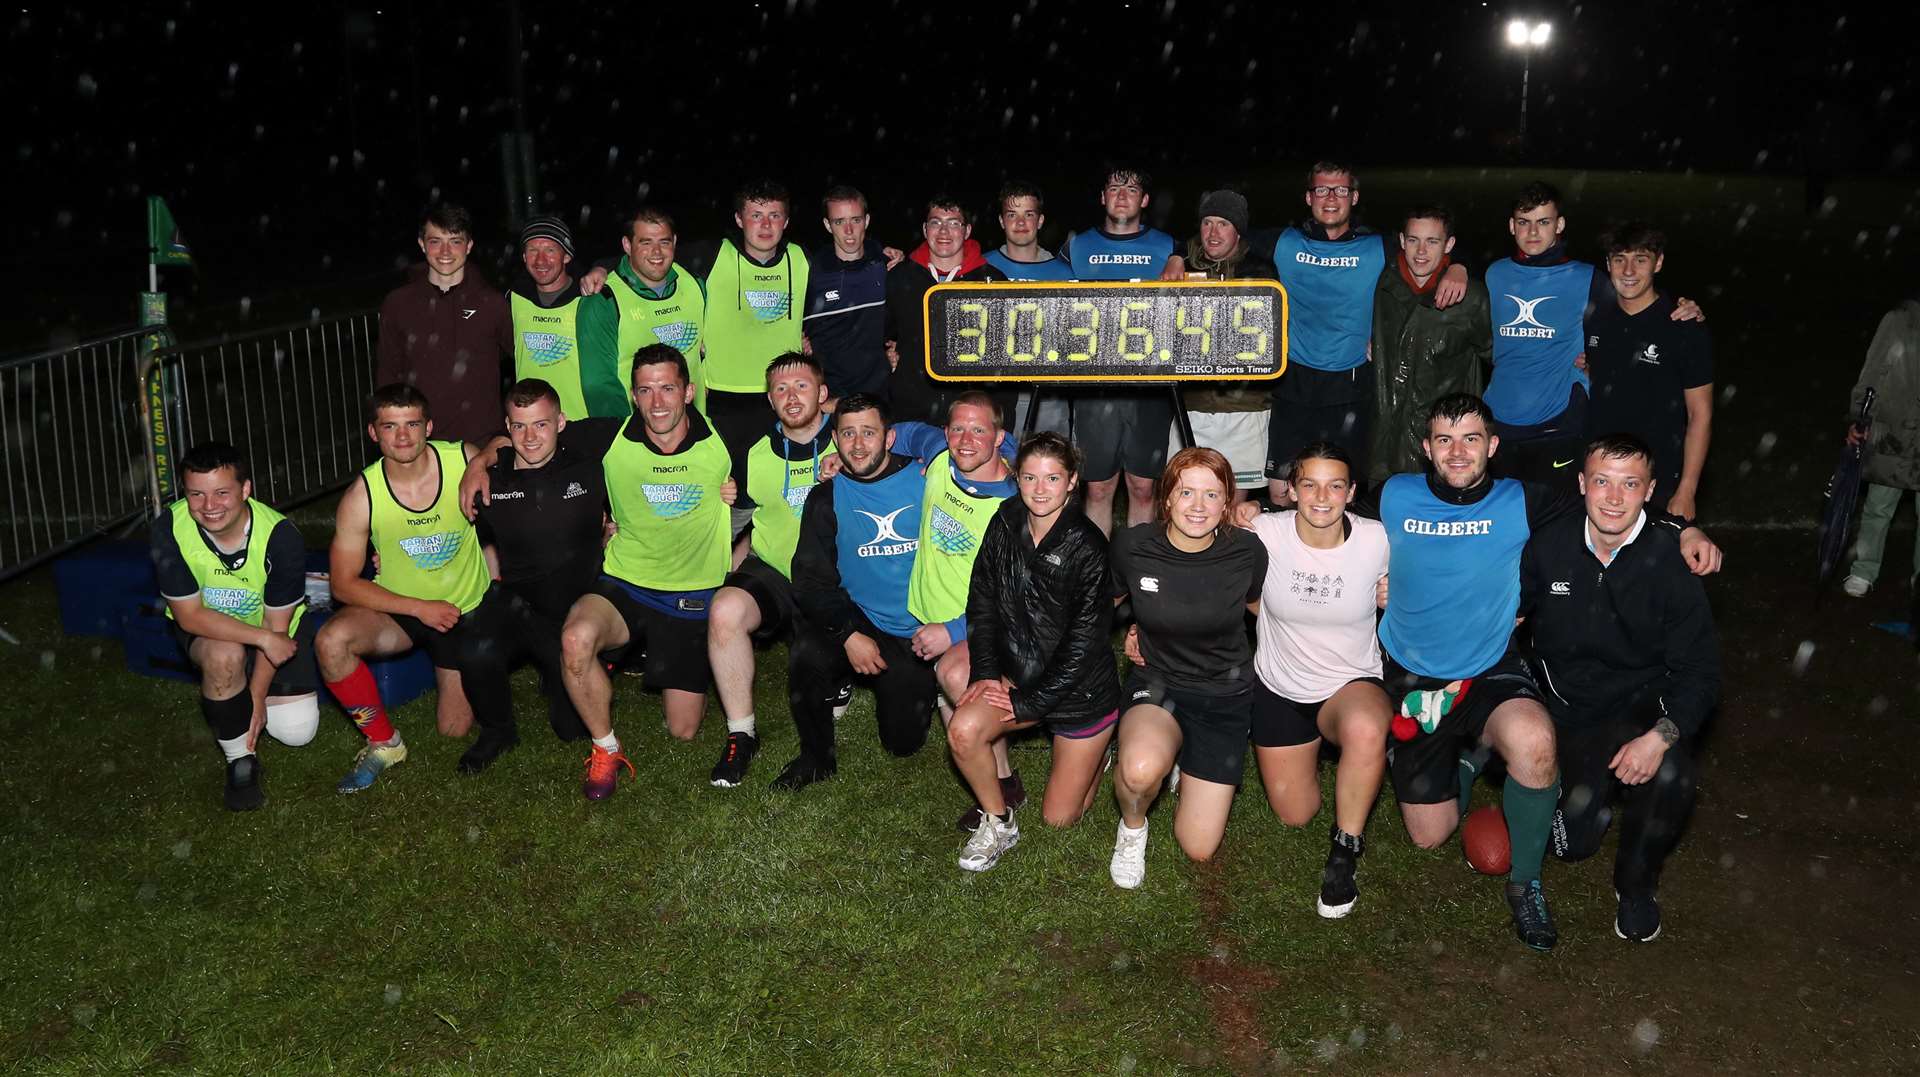 Caithness players celebrating their successful assault on the Guinness World Record for touch rugby, with the clock showing the new best time. Picture: James Gunn